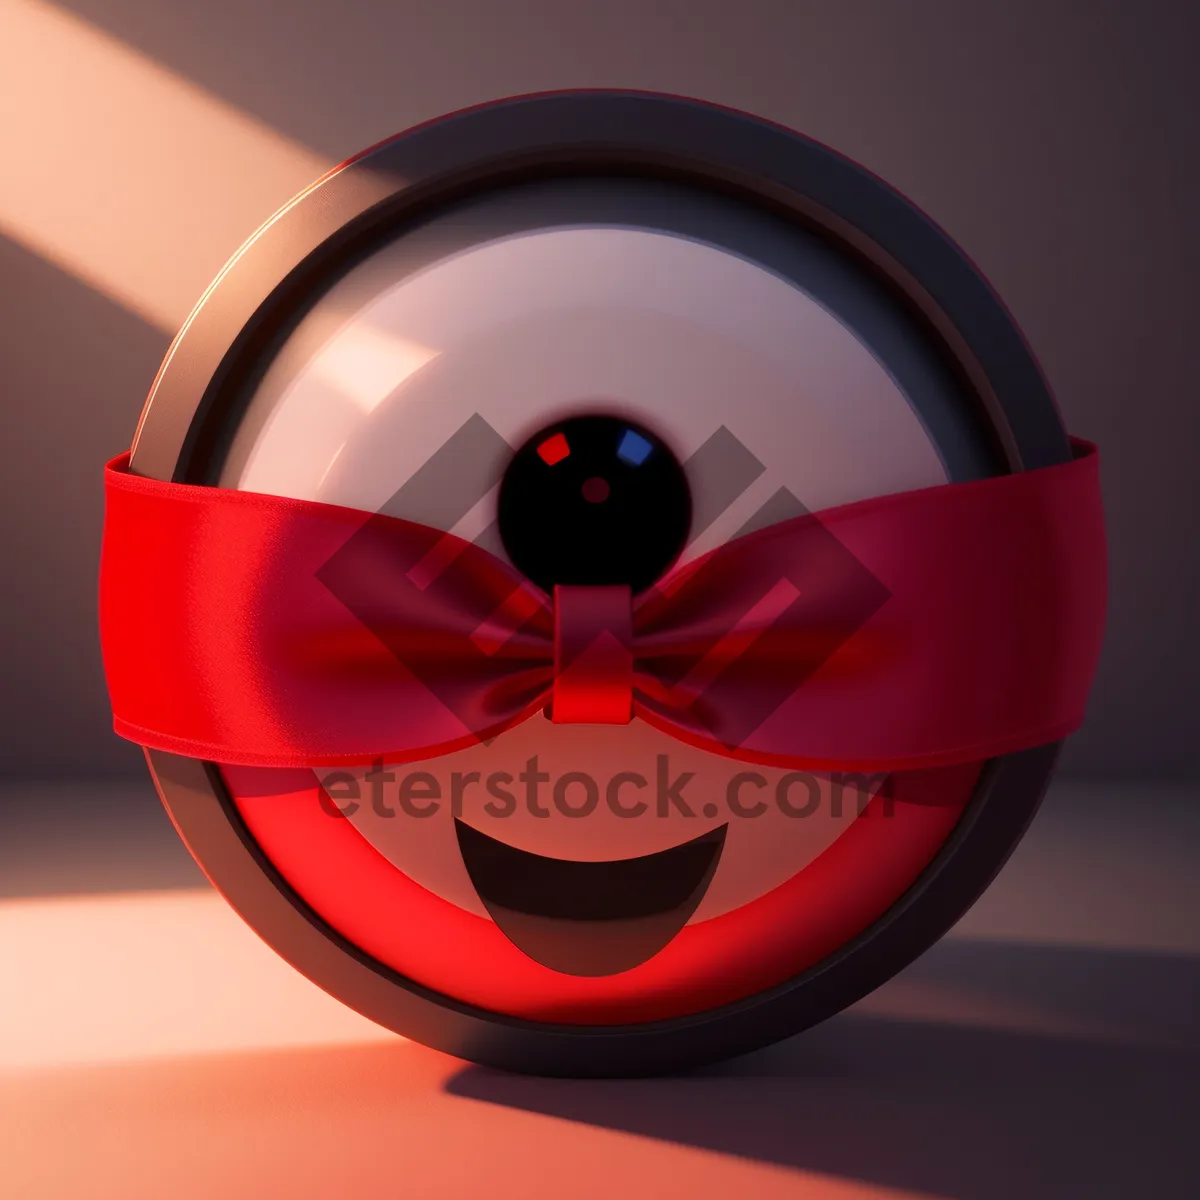 Picture of Shiny Web Button Design with Glass Hazard Symbol